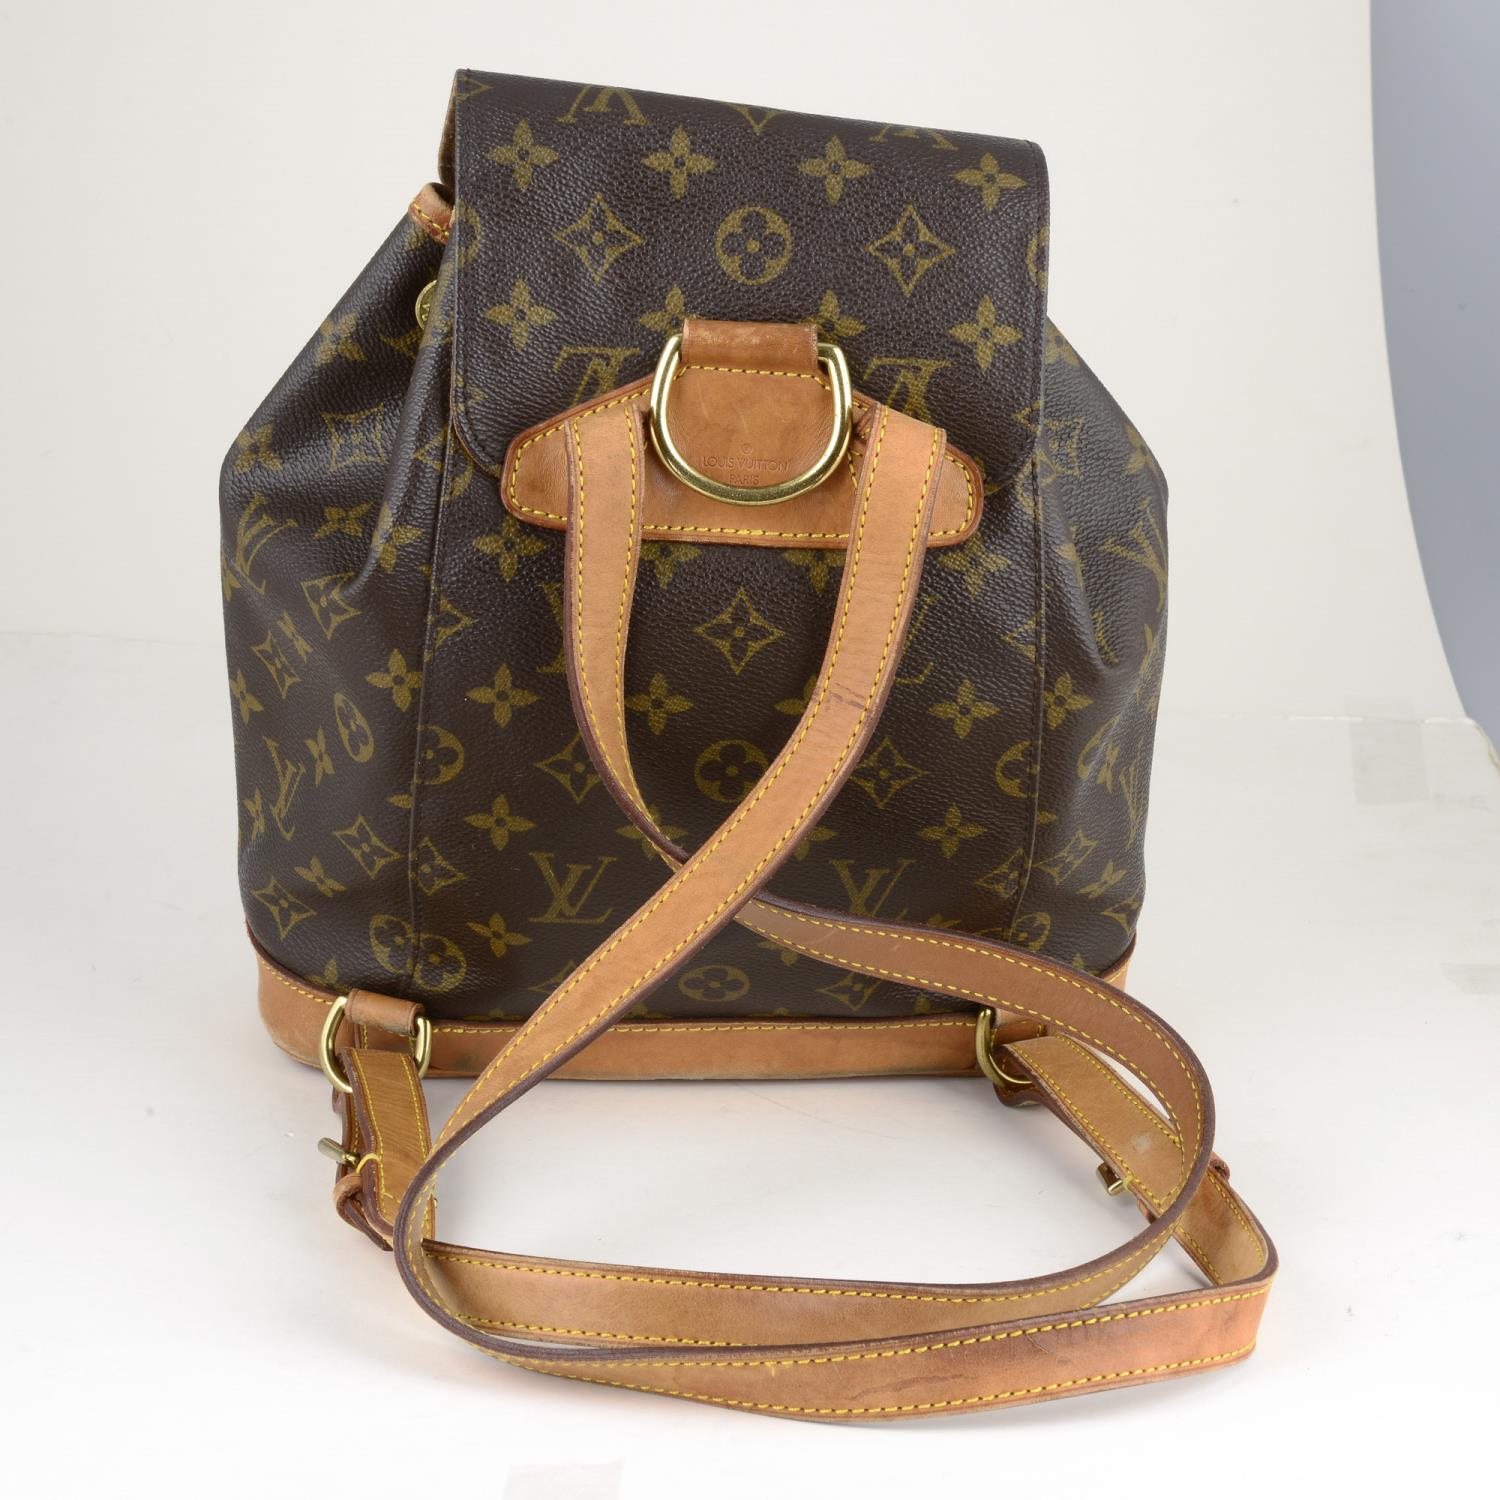 LOUIS VUITTON - a Monogram Montsouris MM backpack. - Image 4 of 6